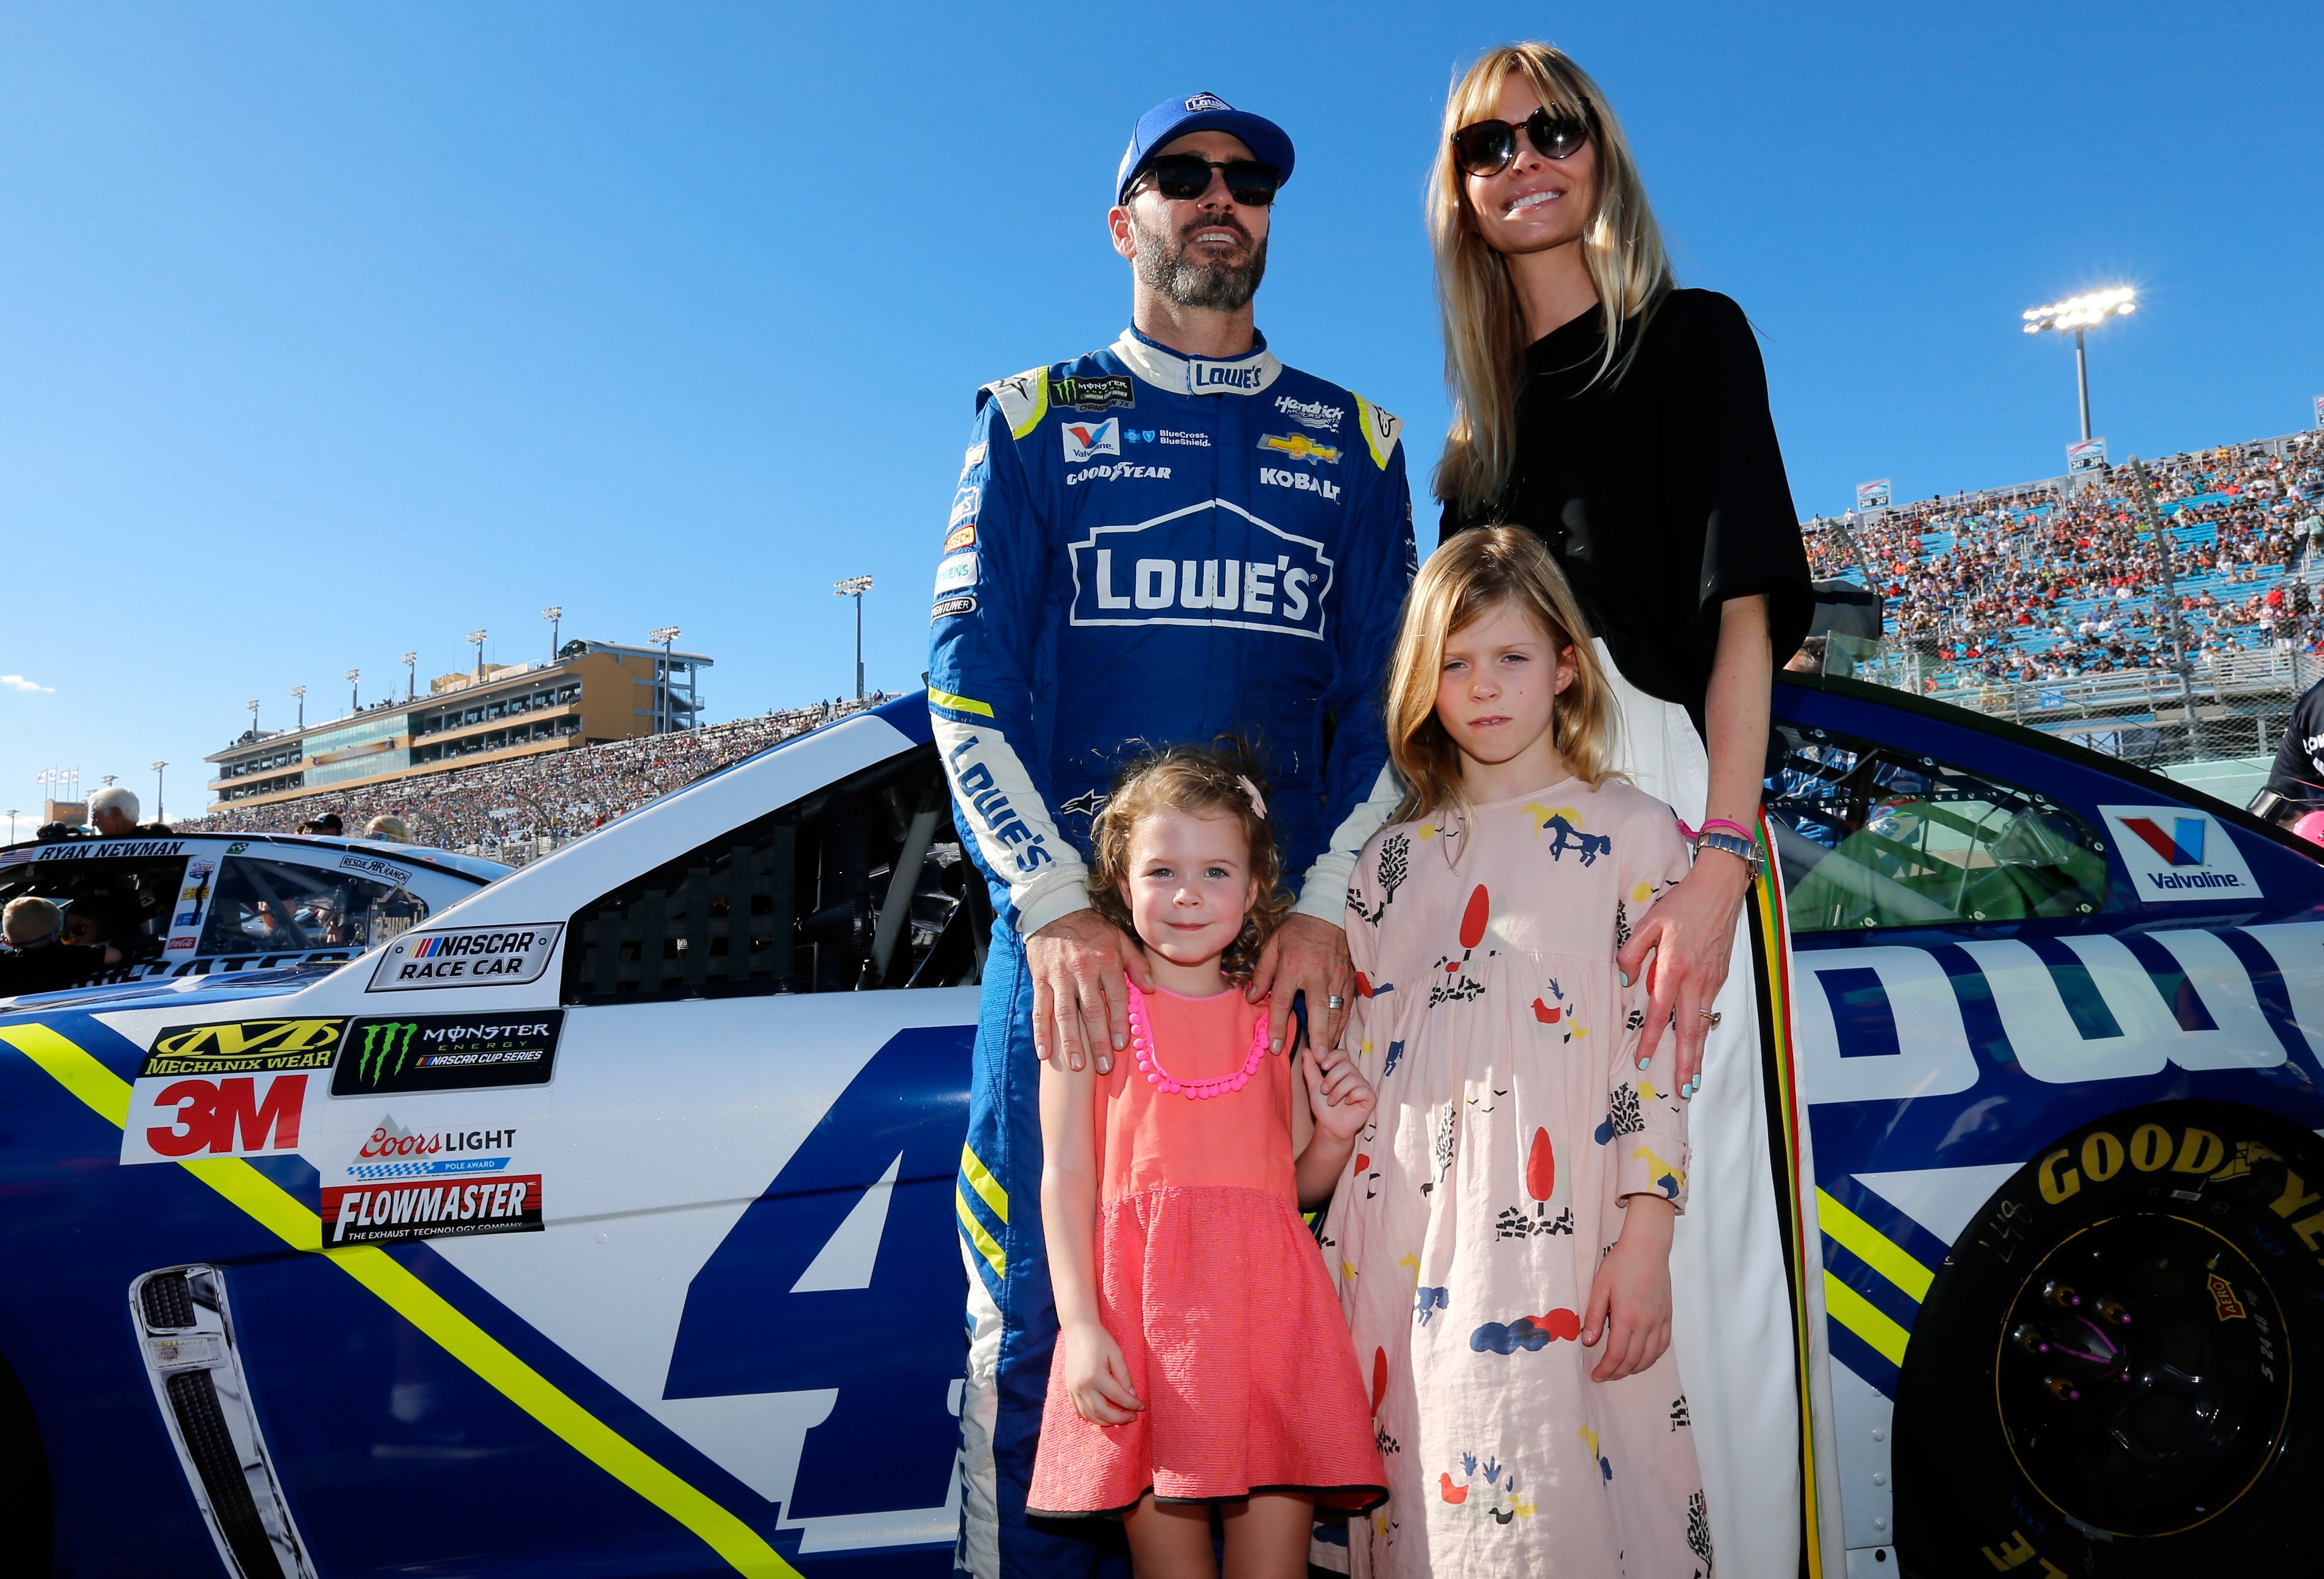 Jimmie Johnson with his wife Chandra and his daughters Genevieve and Lydia before the Monster Energy NASCAR Cup Series Championship on November 19, 2017, in Homestead, Florida. Source: Getty Images.